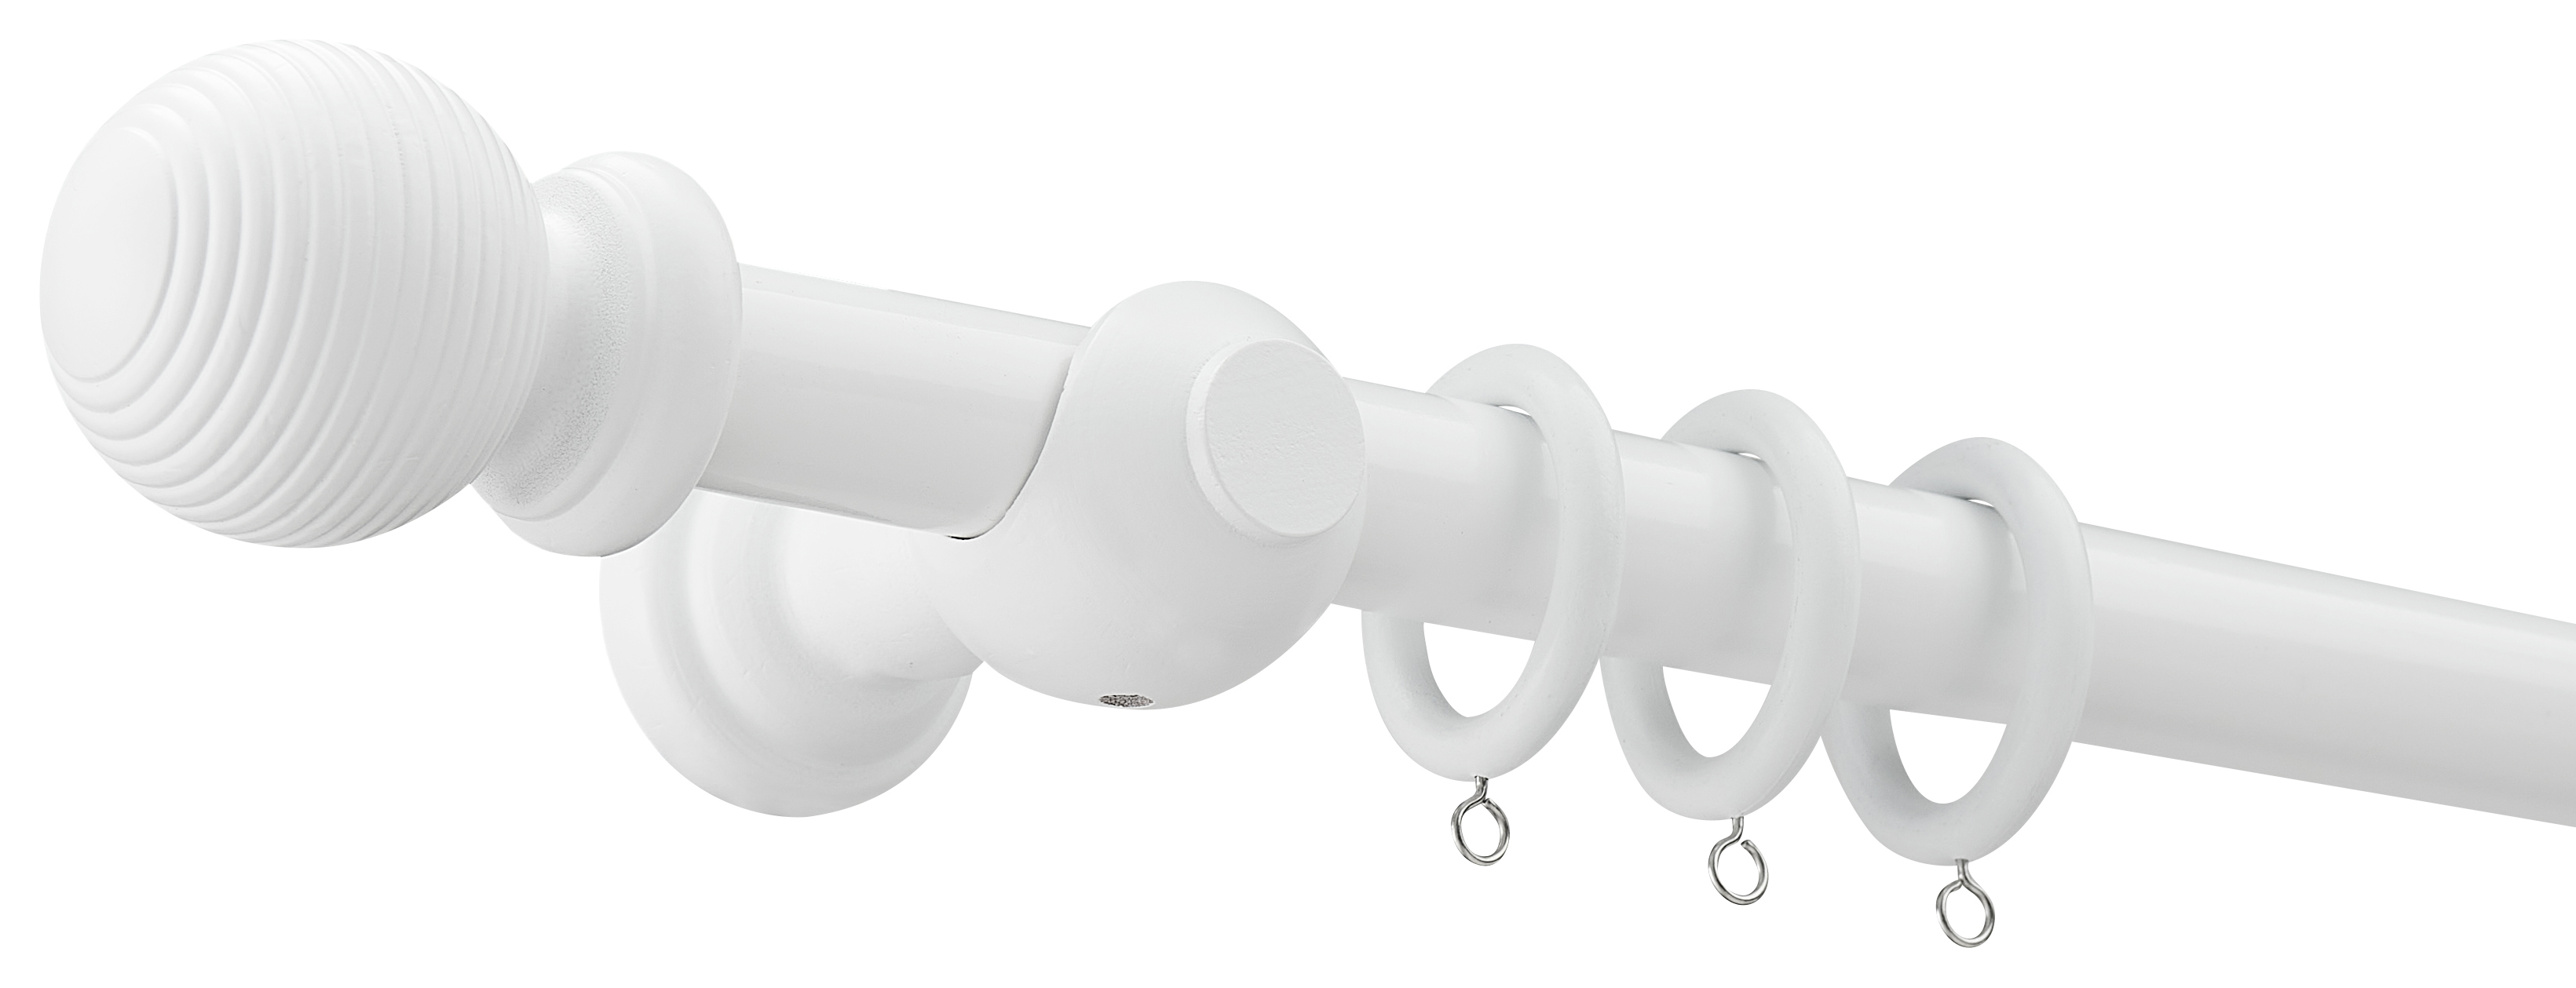 Image of Wickes 28mm Wooden Curtain Pole White (1.8m)